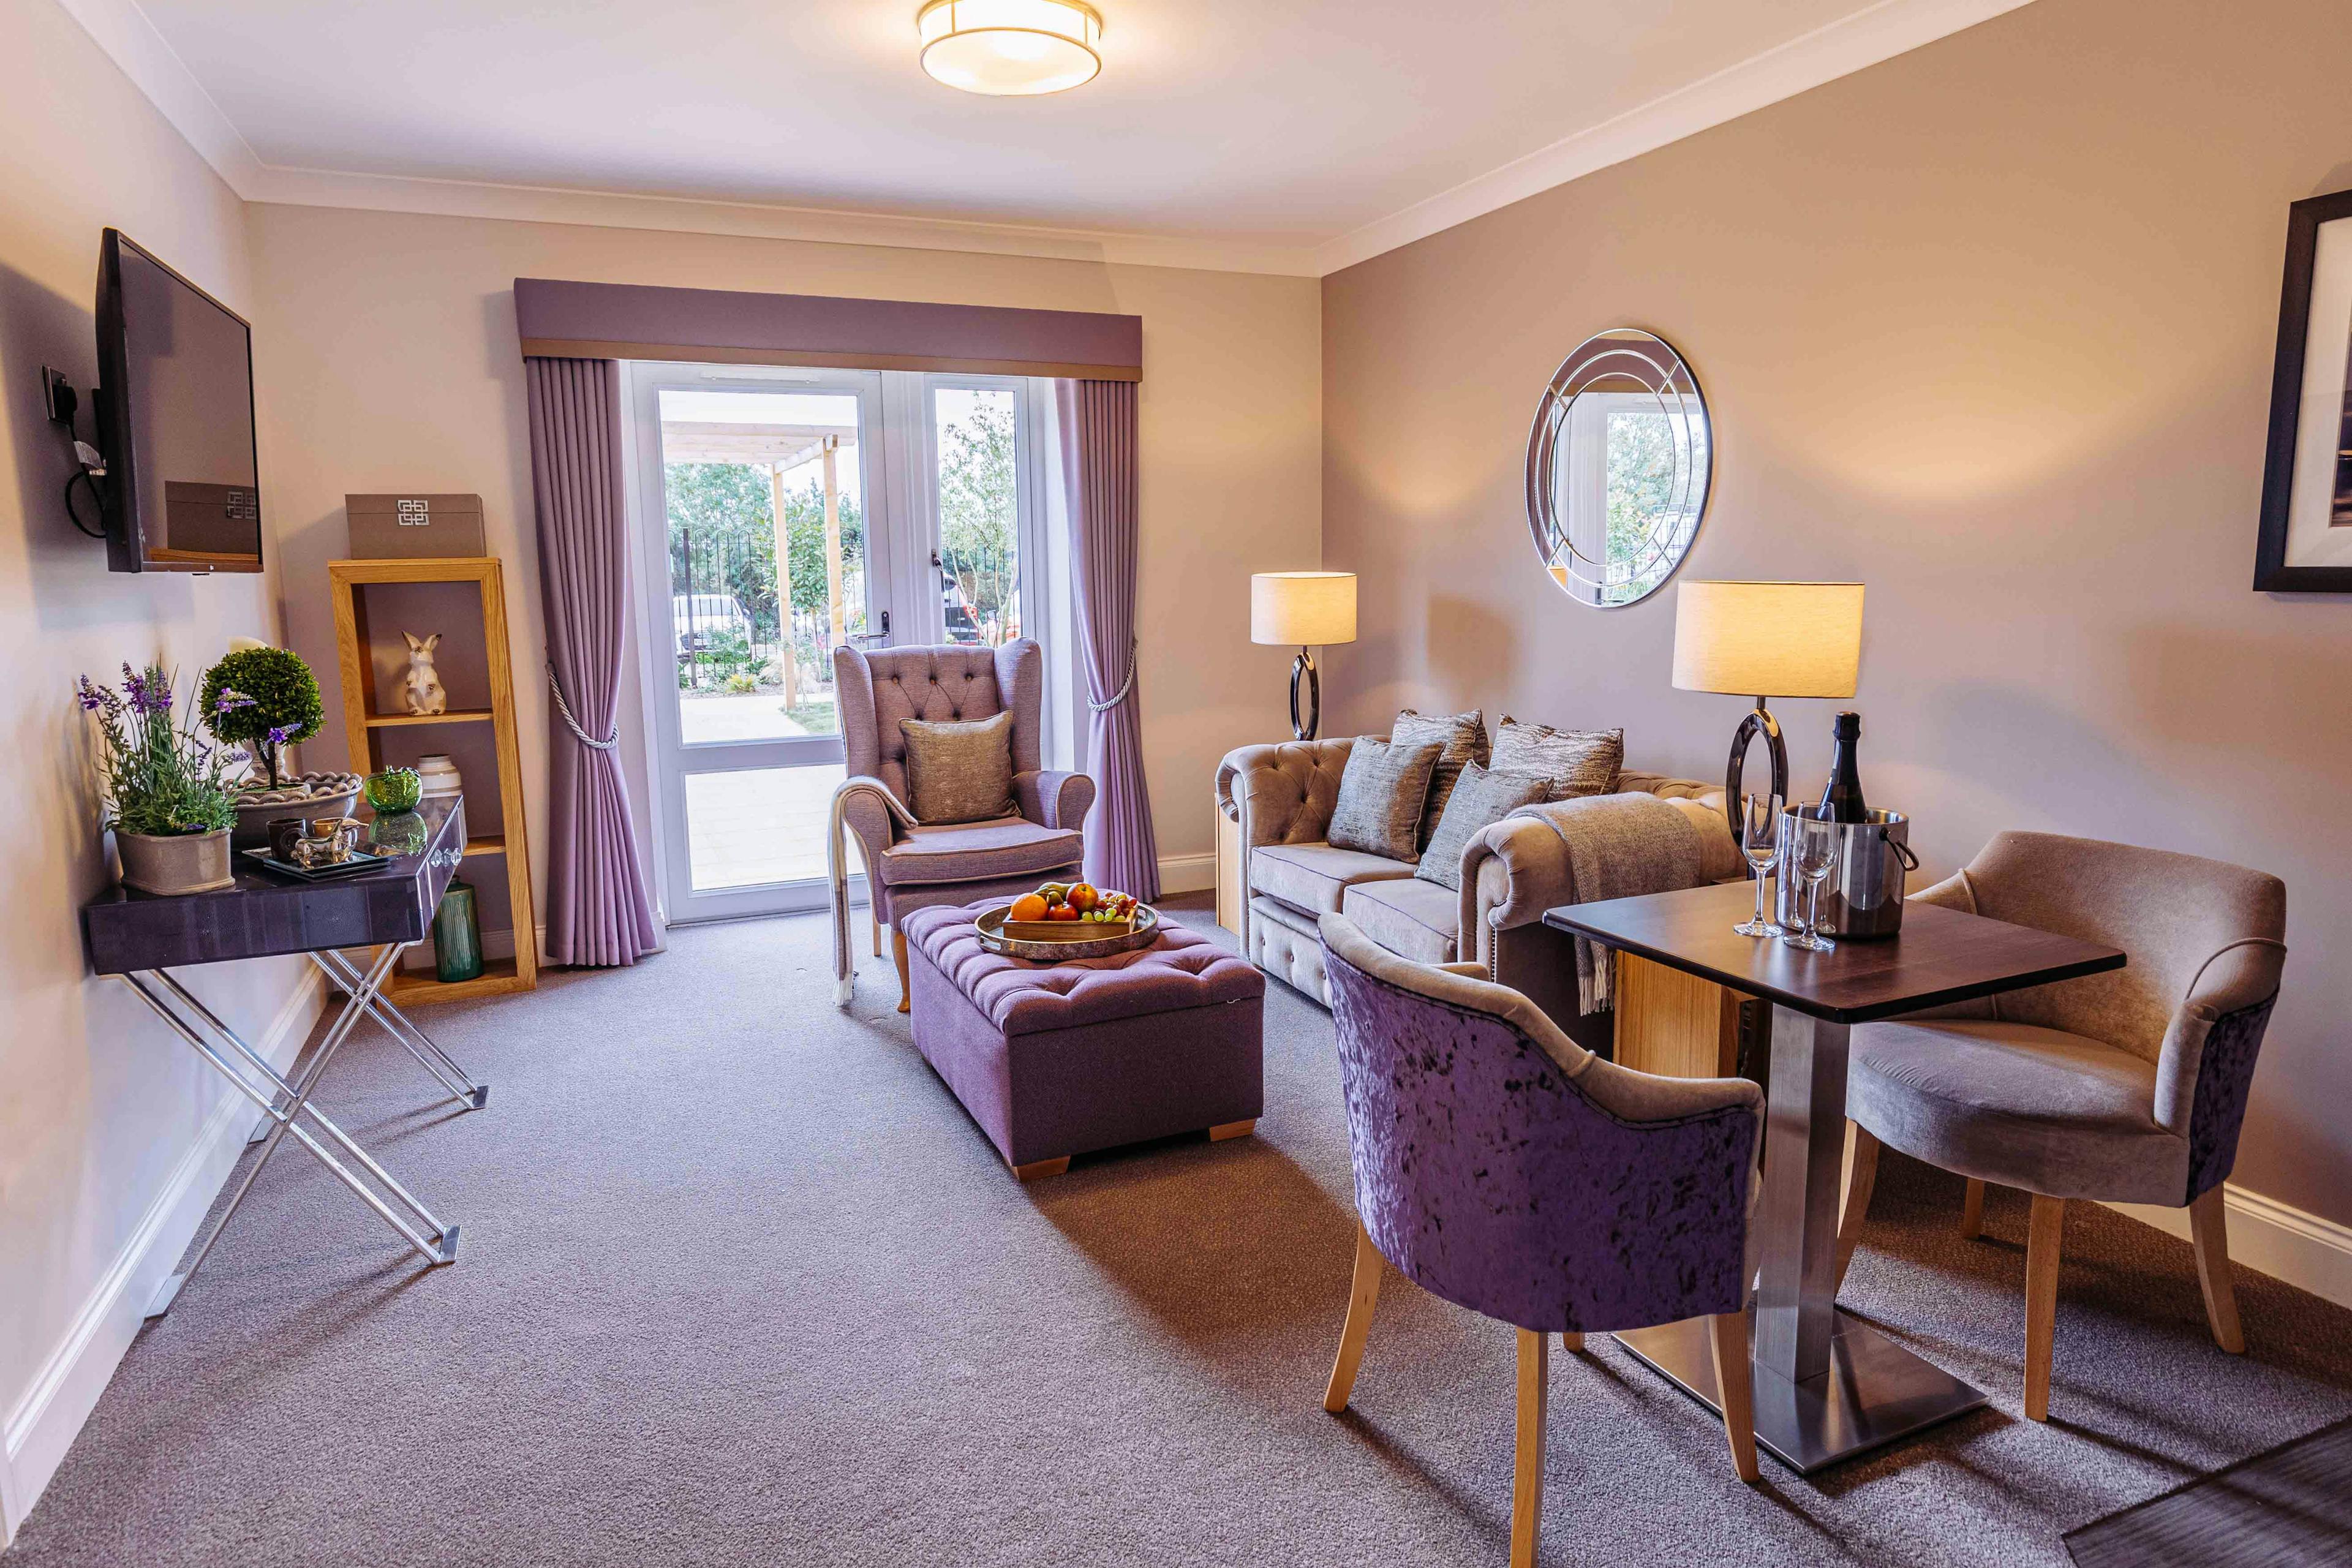 Bedroom at Bere Grove Care Home in Horndean, East Hampshire